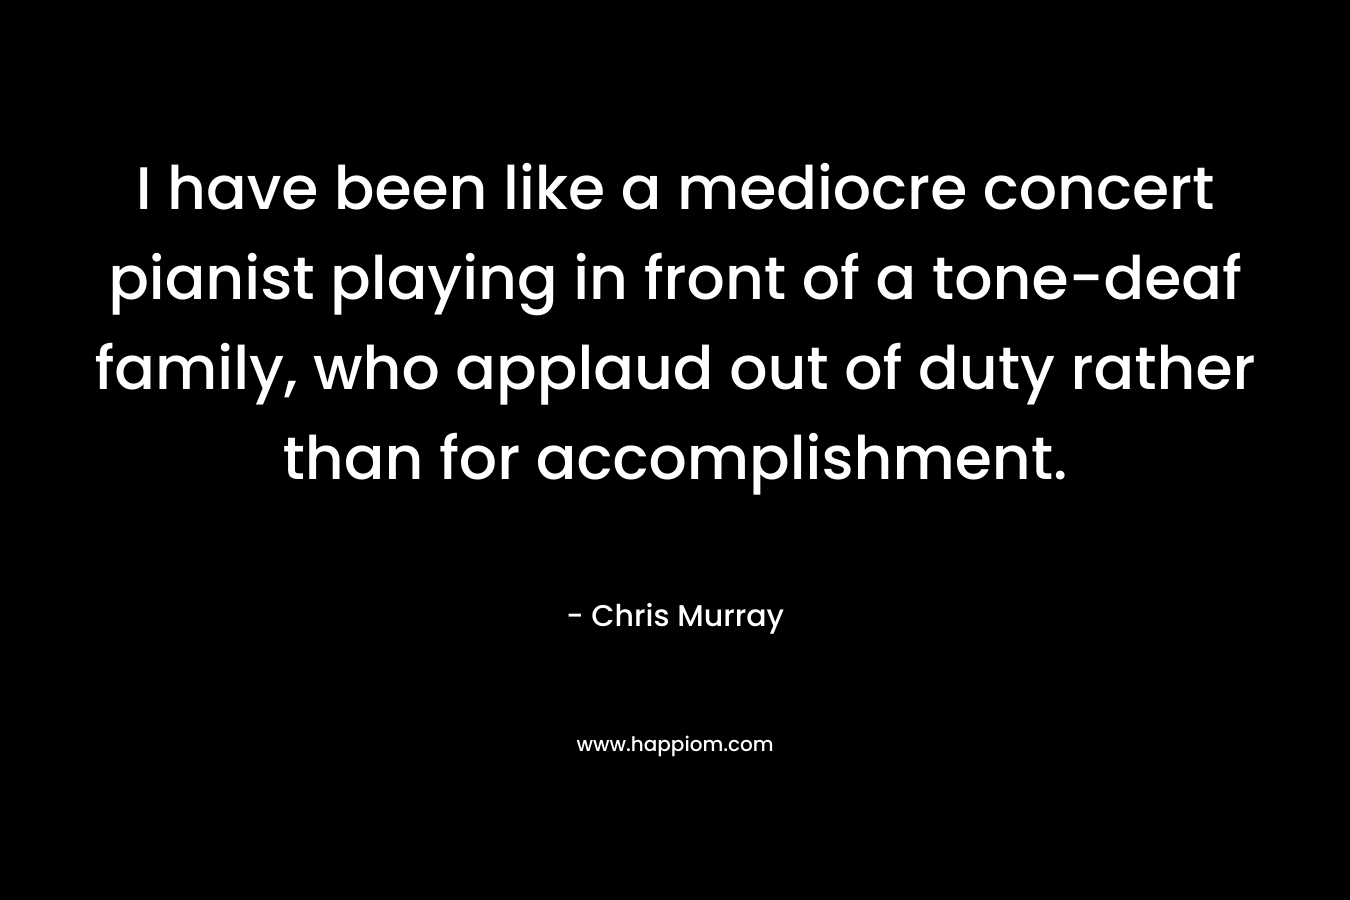 I have been like a mediocre concert pianist playing in front of a tone-deaf family, who applaud out of duty rather than for accomplishment. – Chris     Murray